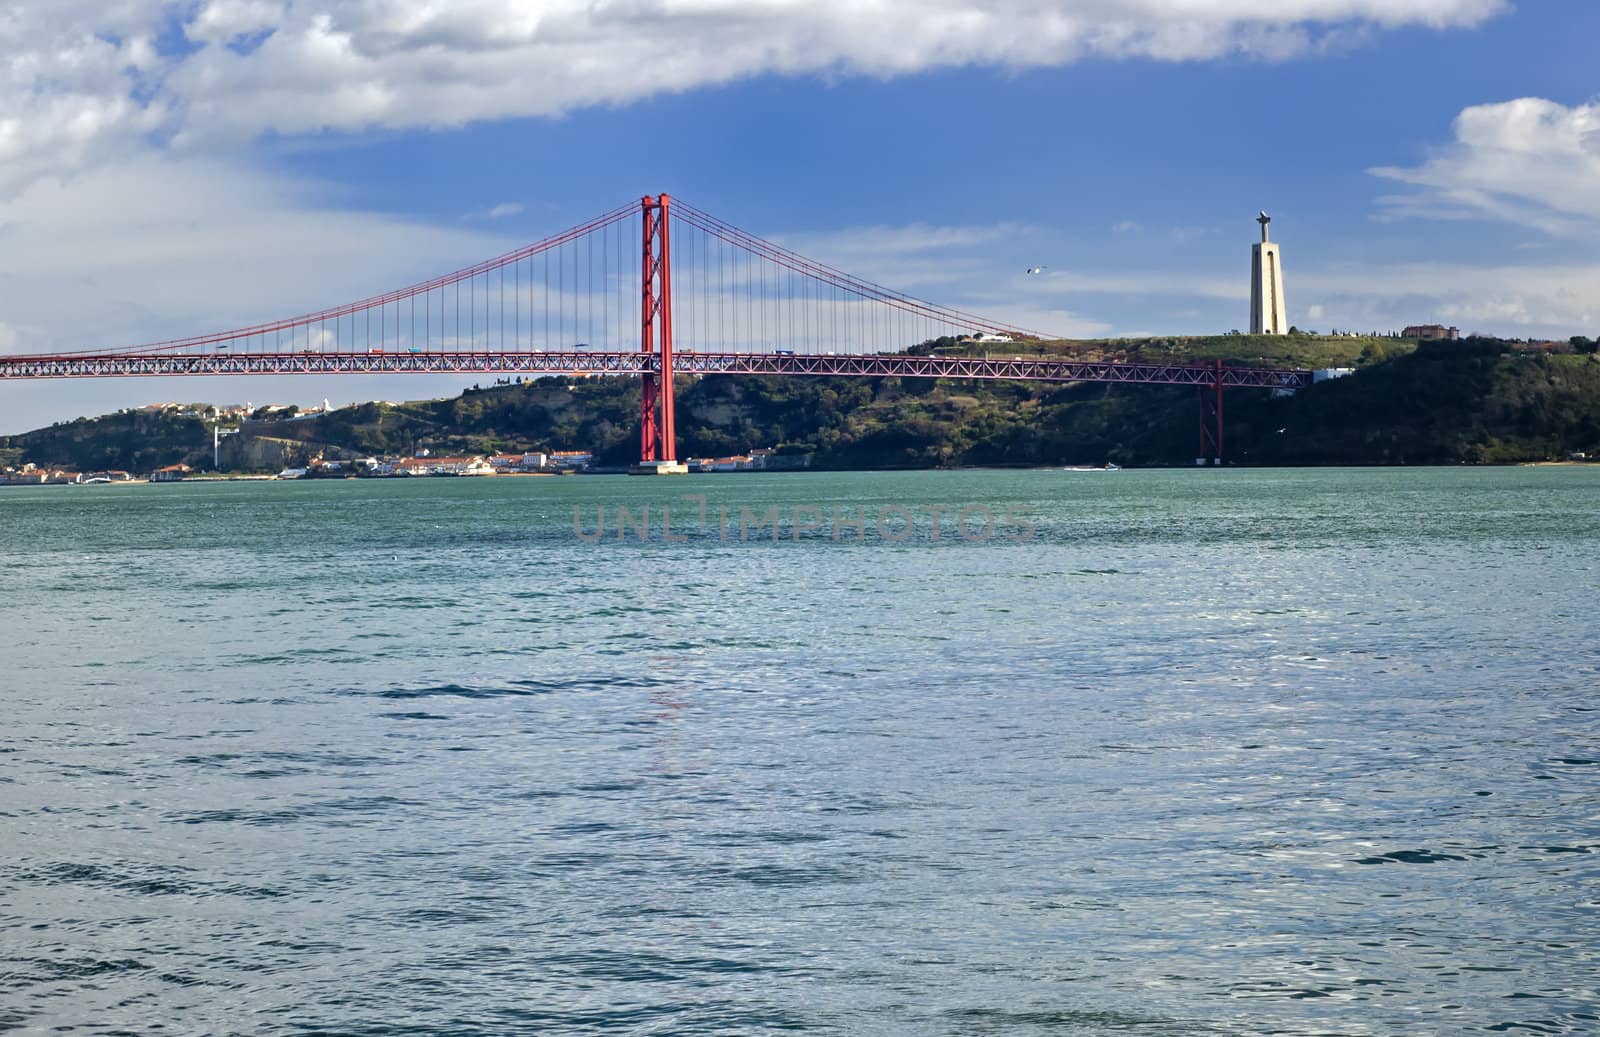 The 25th of April Suspension Bridge in Lisbon, Portugal. Captured from the Tagus River with the Statue of Christ (Cristo Rei)  in the distance.